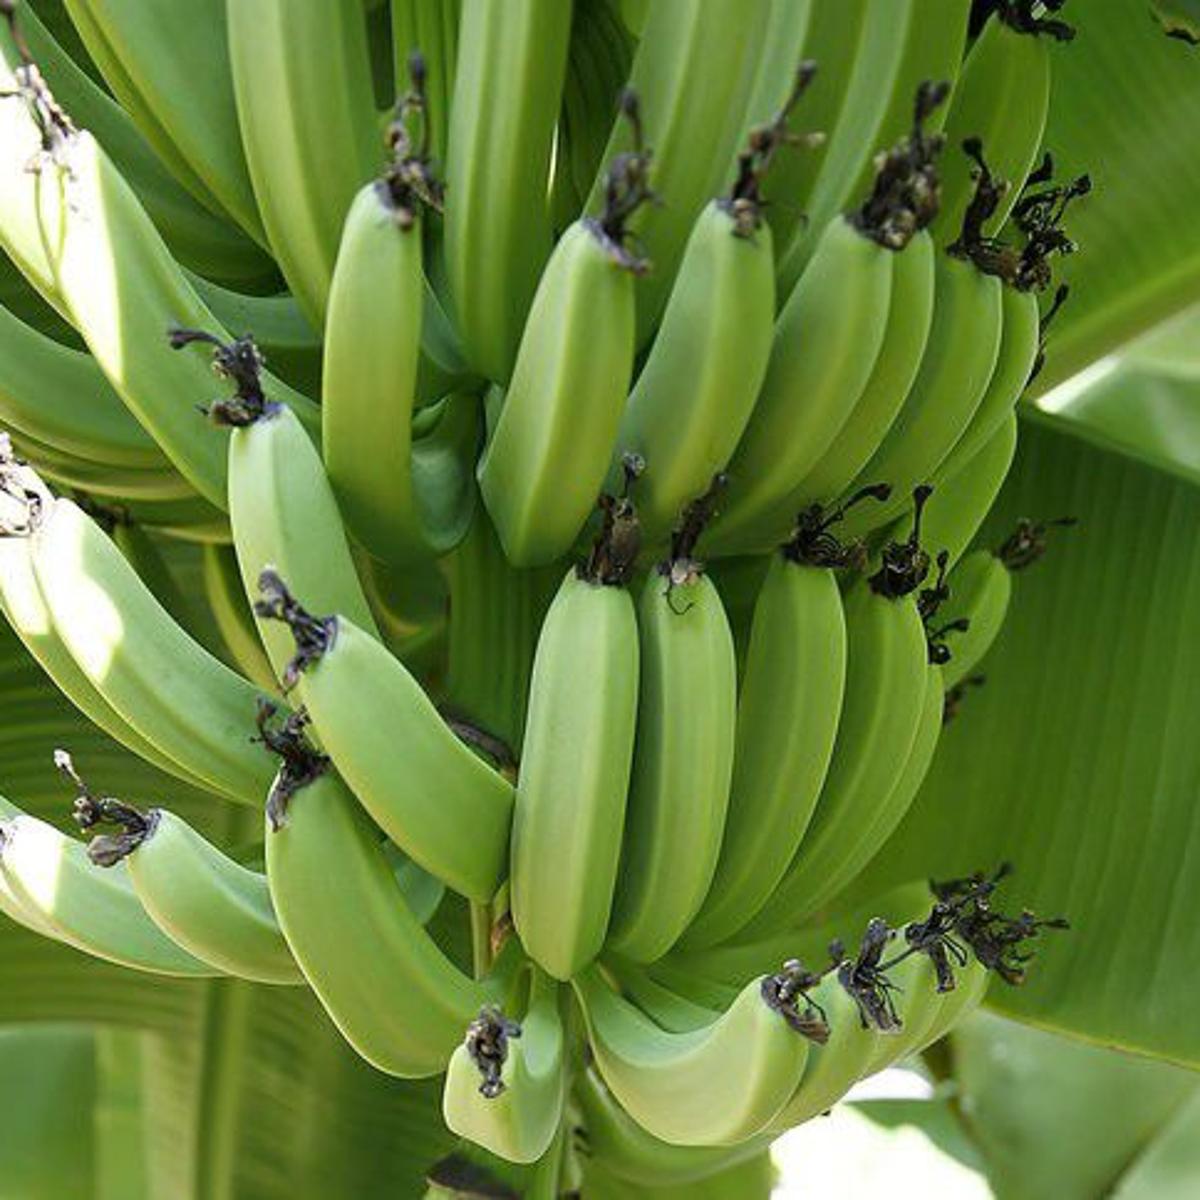 Banana Plants Answers To All Your Questions About Care Pruning And Harvesting Fruit Home Garden Nola Com,Stair Carpeting Options